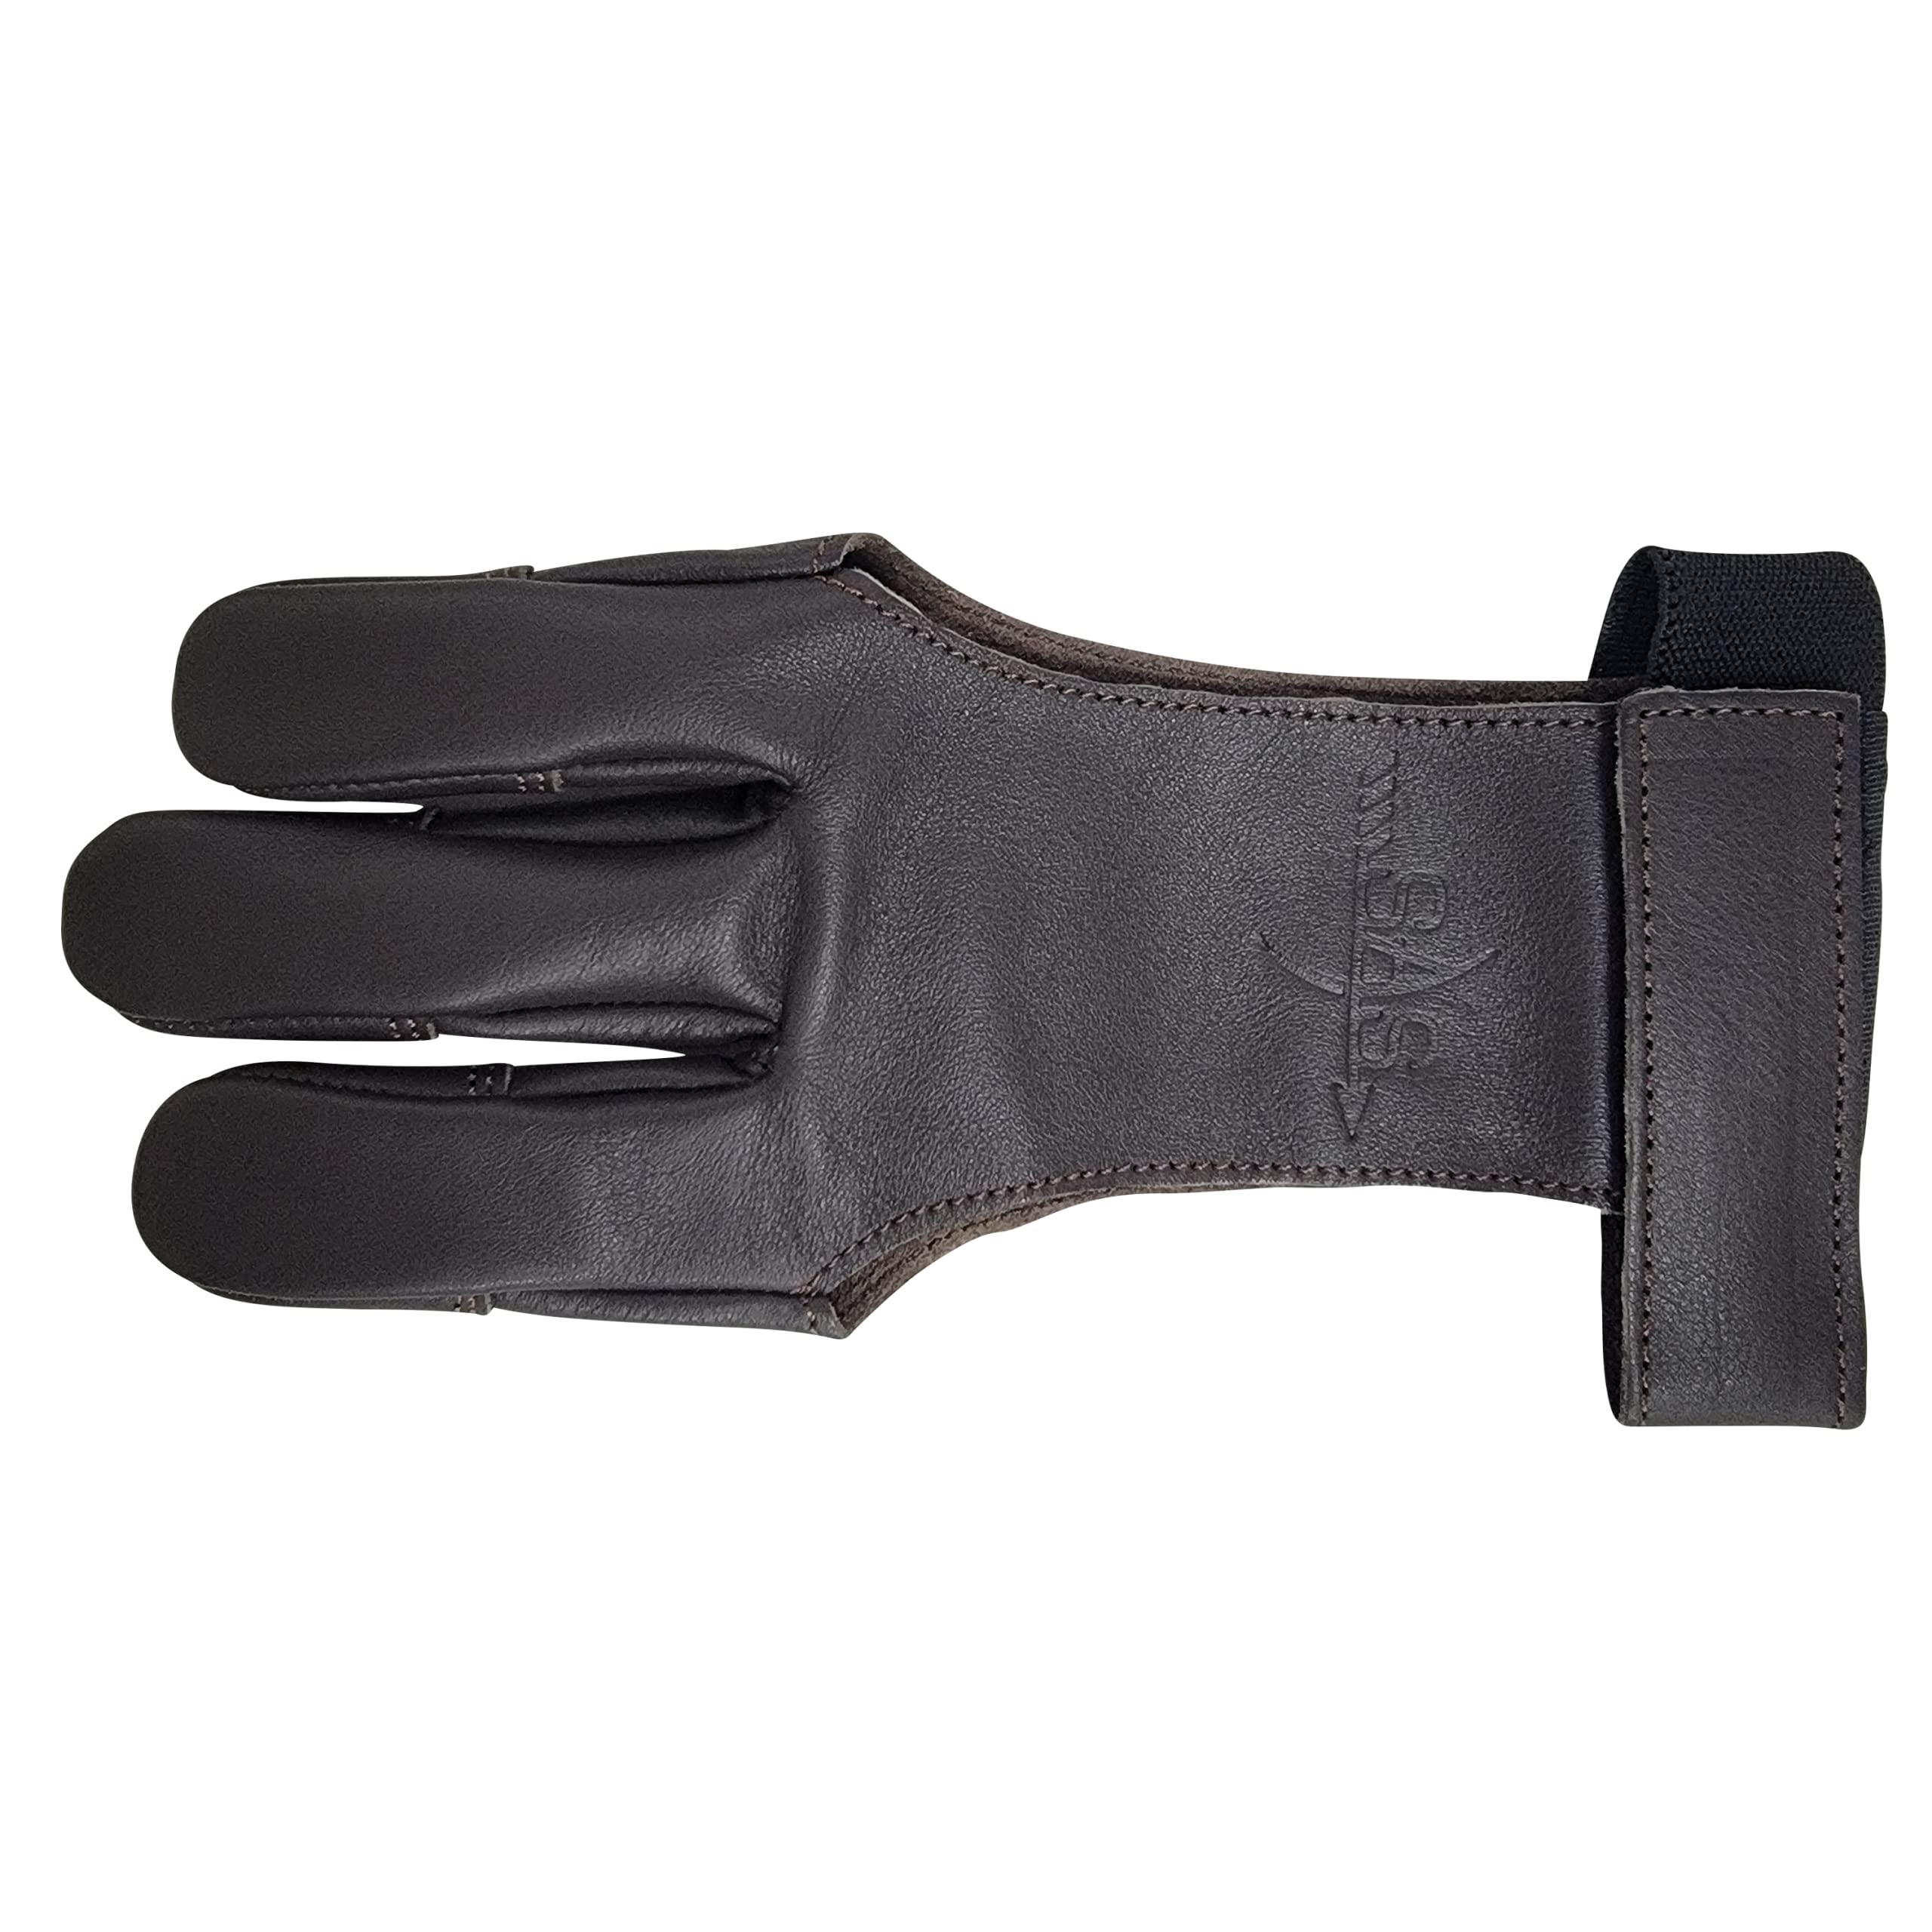 SAS Leather Traditional 3 Finger Archery Shooting Gloves for